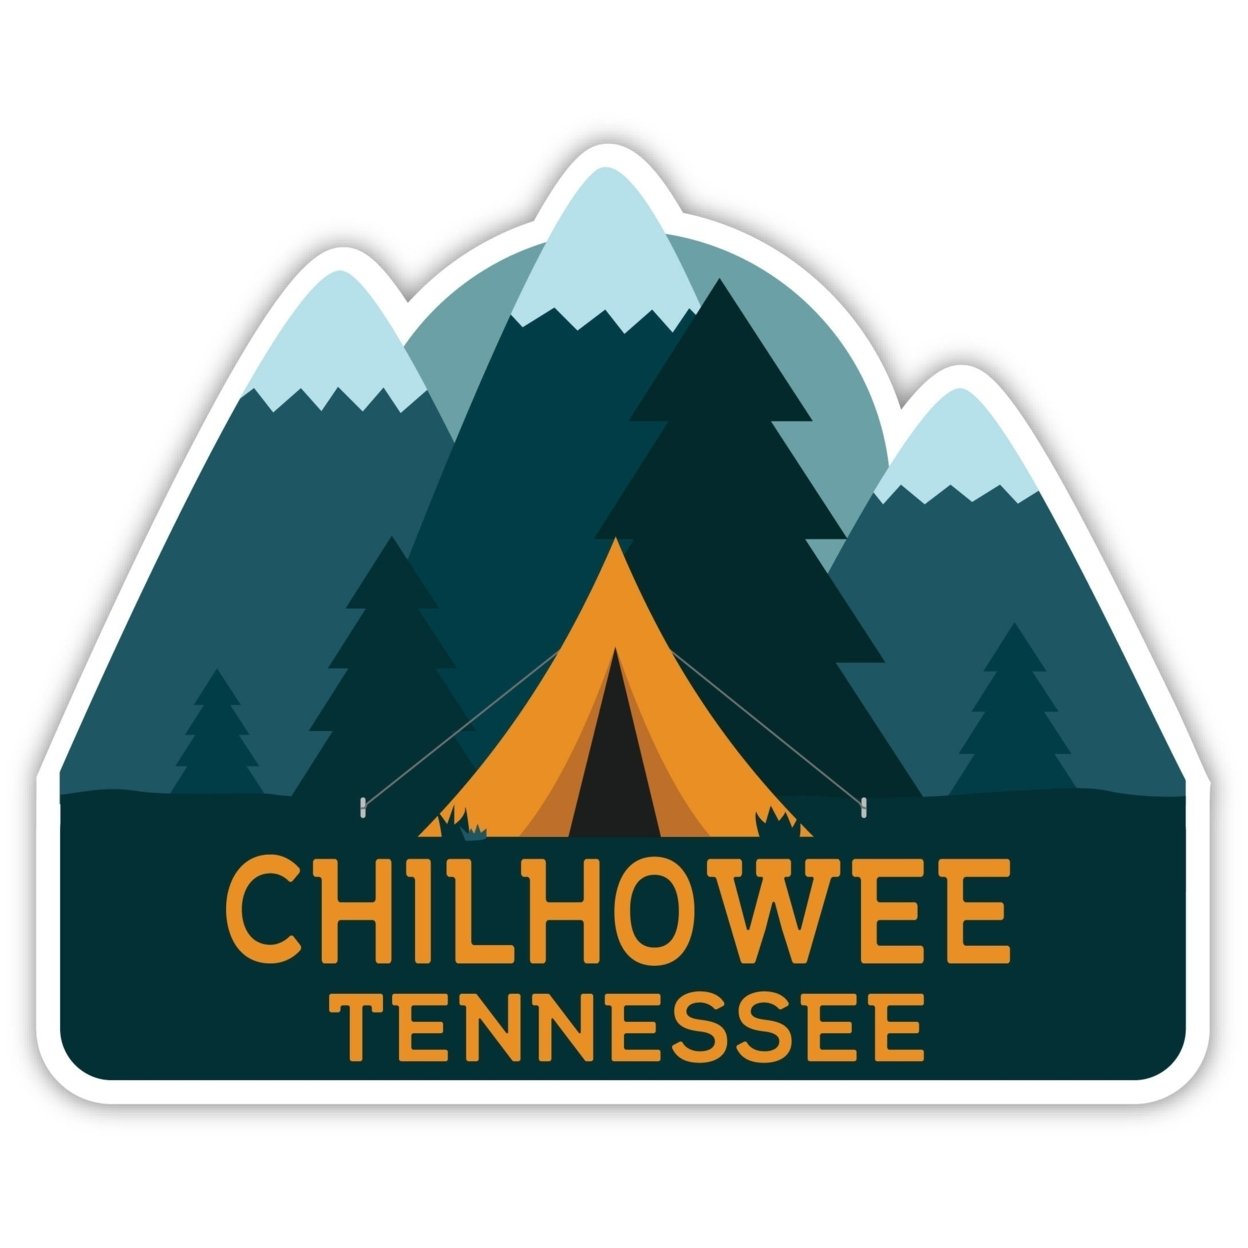 Chilhowee Tennessee Souvenir Decorative Stickers (Choose Theme And Size) - Single Unit, 12-Inch, Adventures Awaits